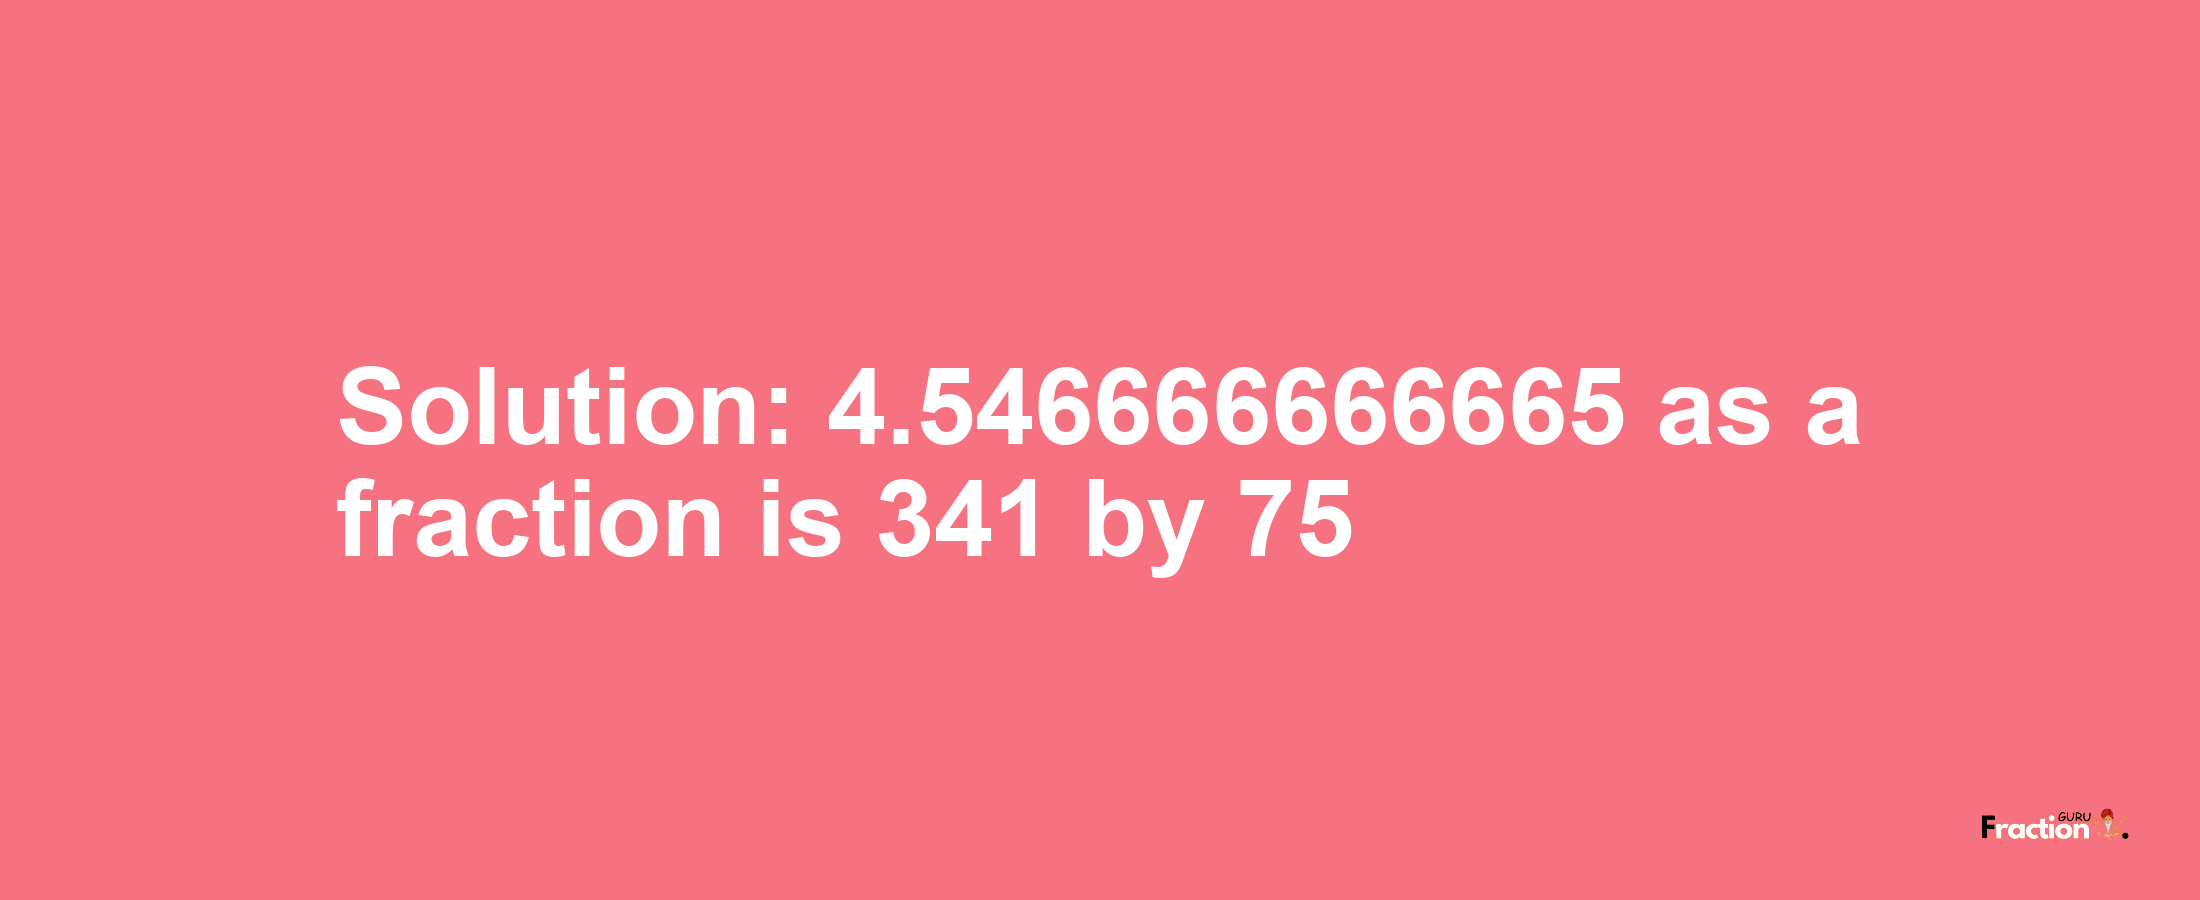 Solution:4.546666666665 as a fraction is 341/75